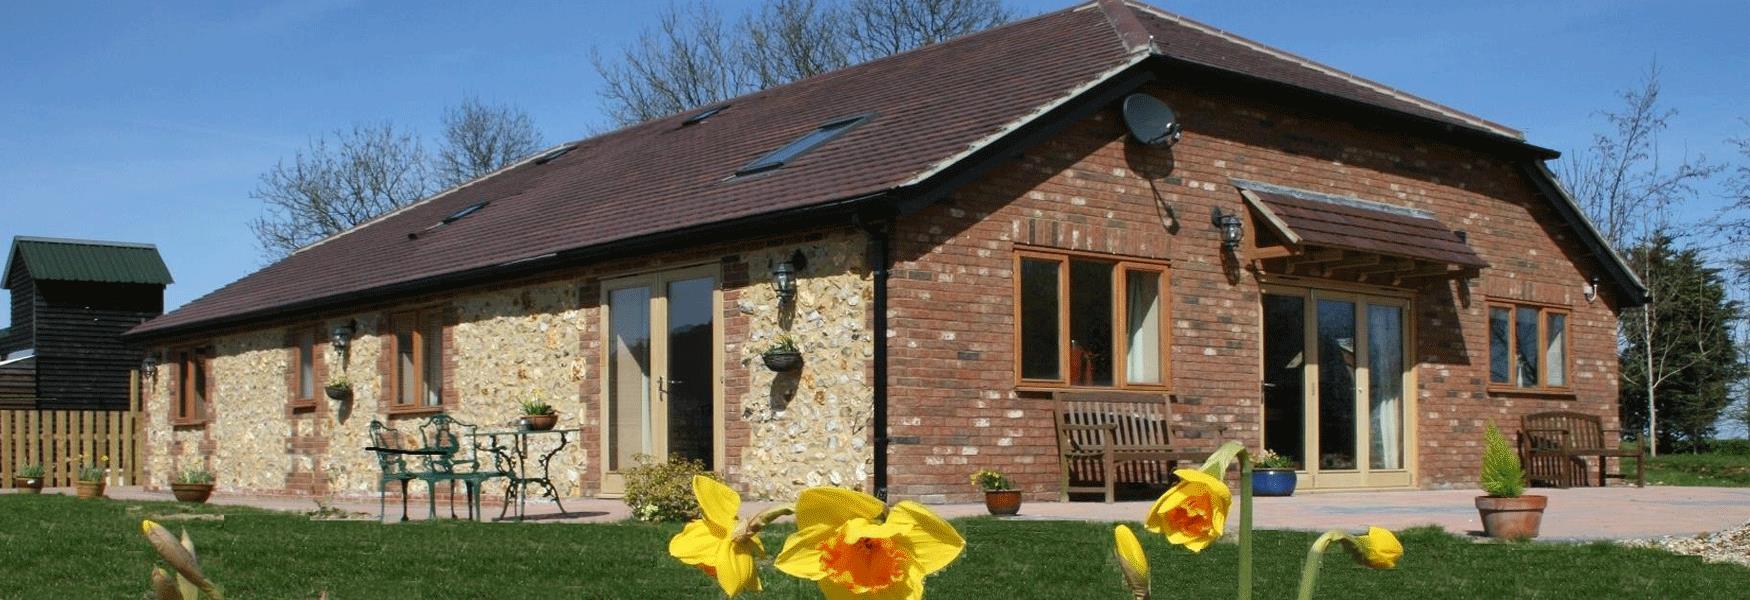 Flint Lodge at Coldblow Farm, top of the North Downs, near Maidstone, Kent.  Fully accessible and perfect for a family who need accessible accommodation. Great patio and barbecue area